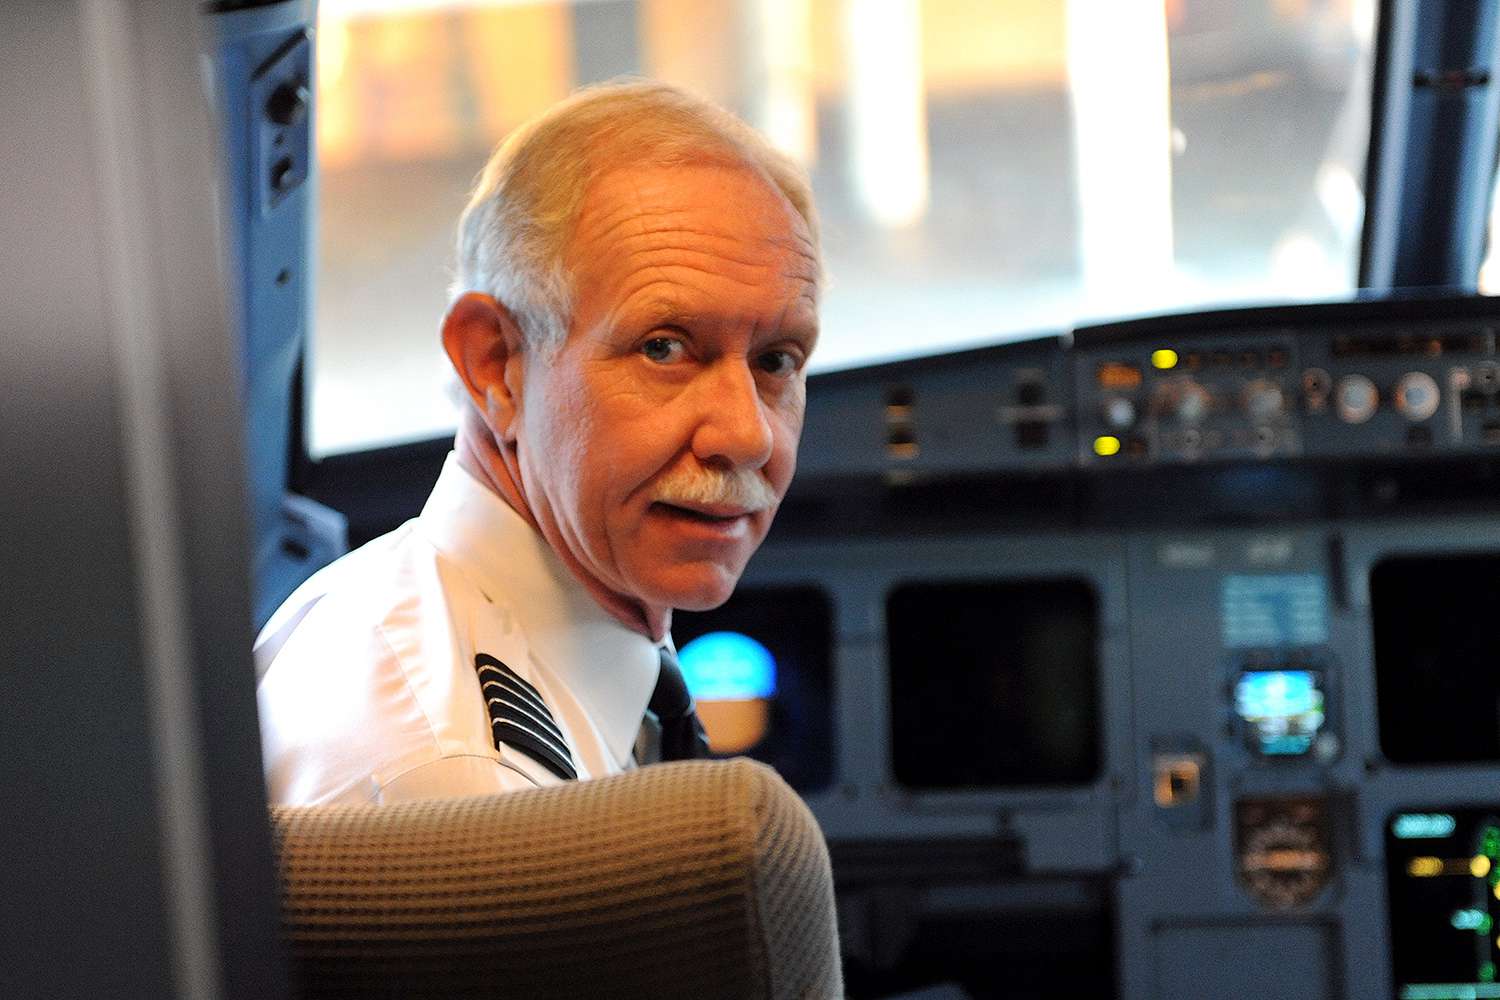 The Shocking Reason Behind The Drastic Pension Cut For Heroic Airline Pilot Sully Sullenberger